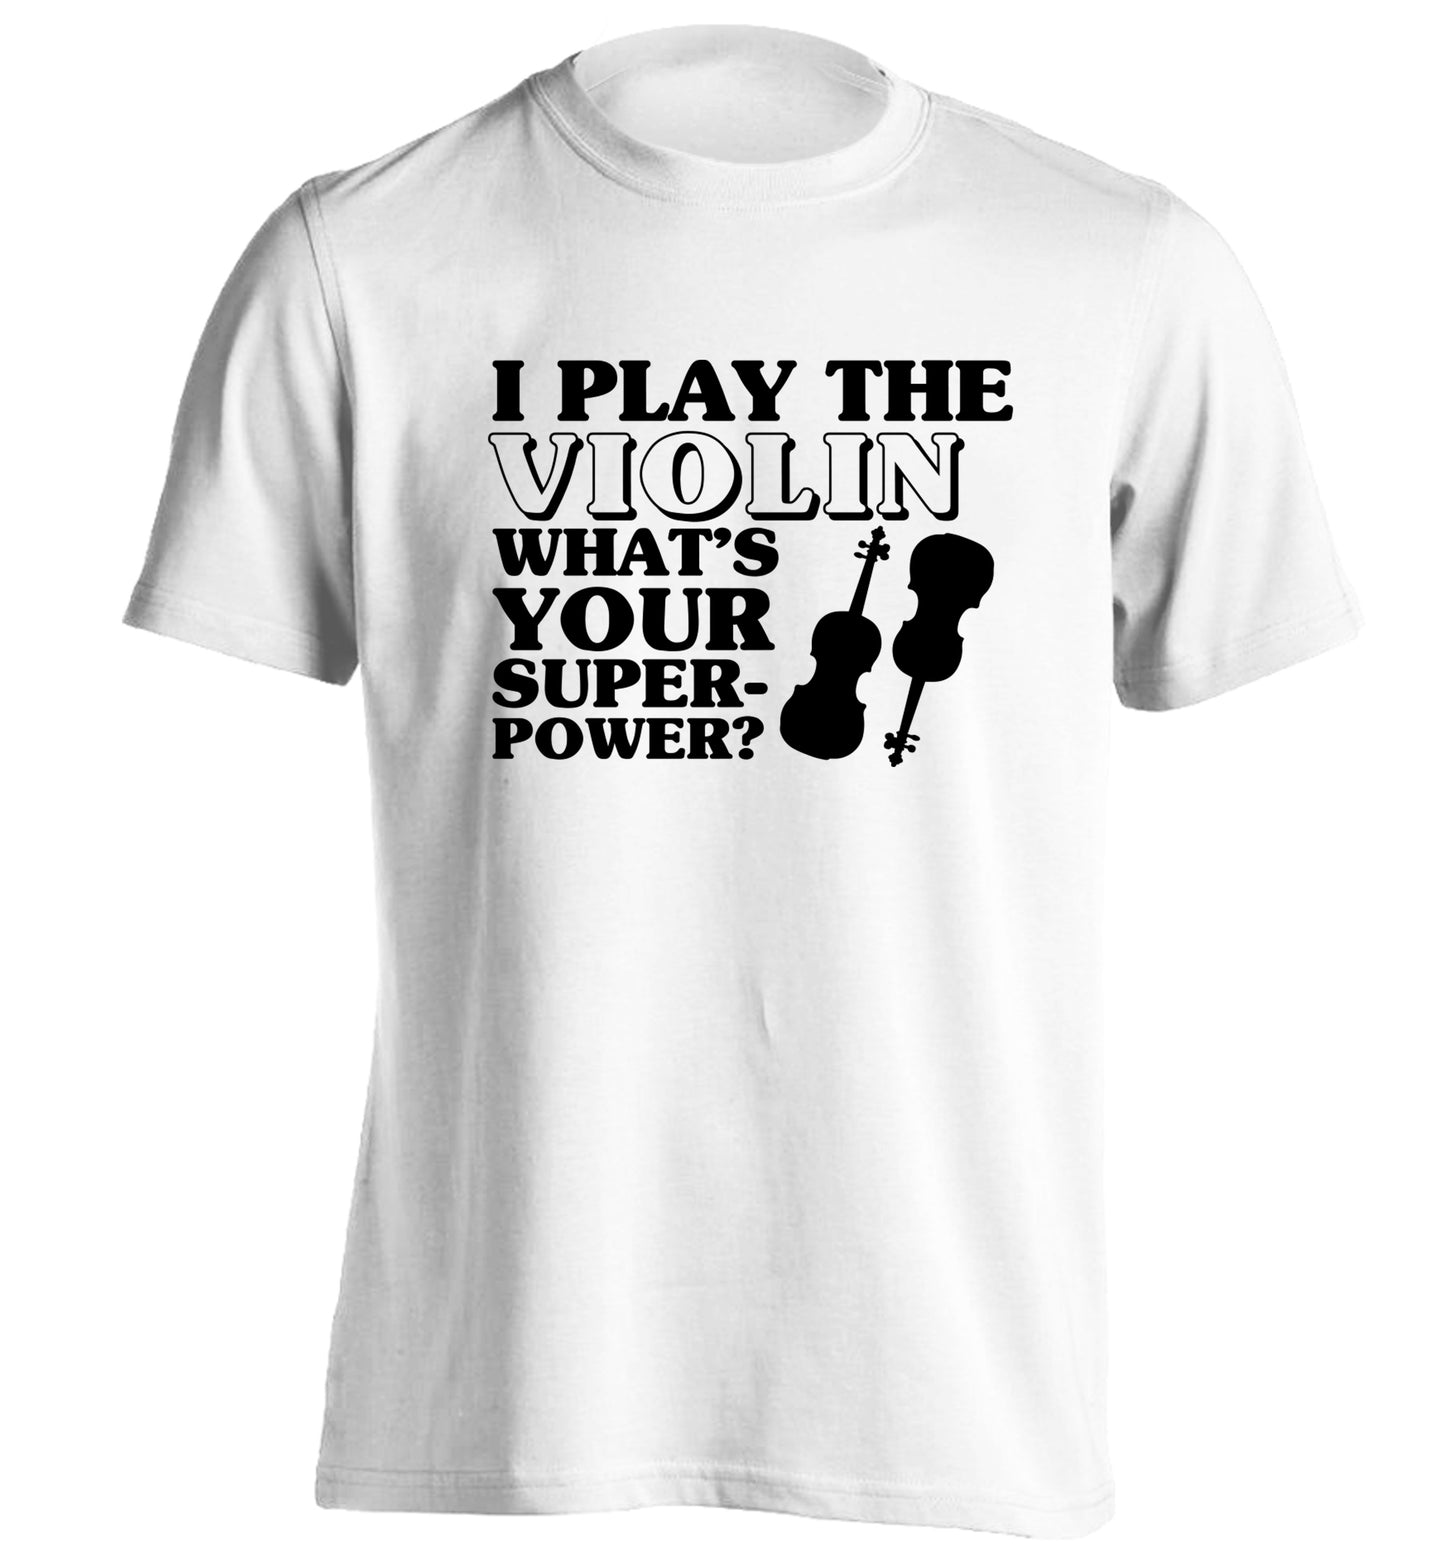 I Play Violin What's Your Superpower? adults unisex white Tshirt 2XL